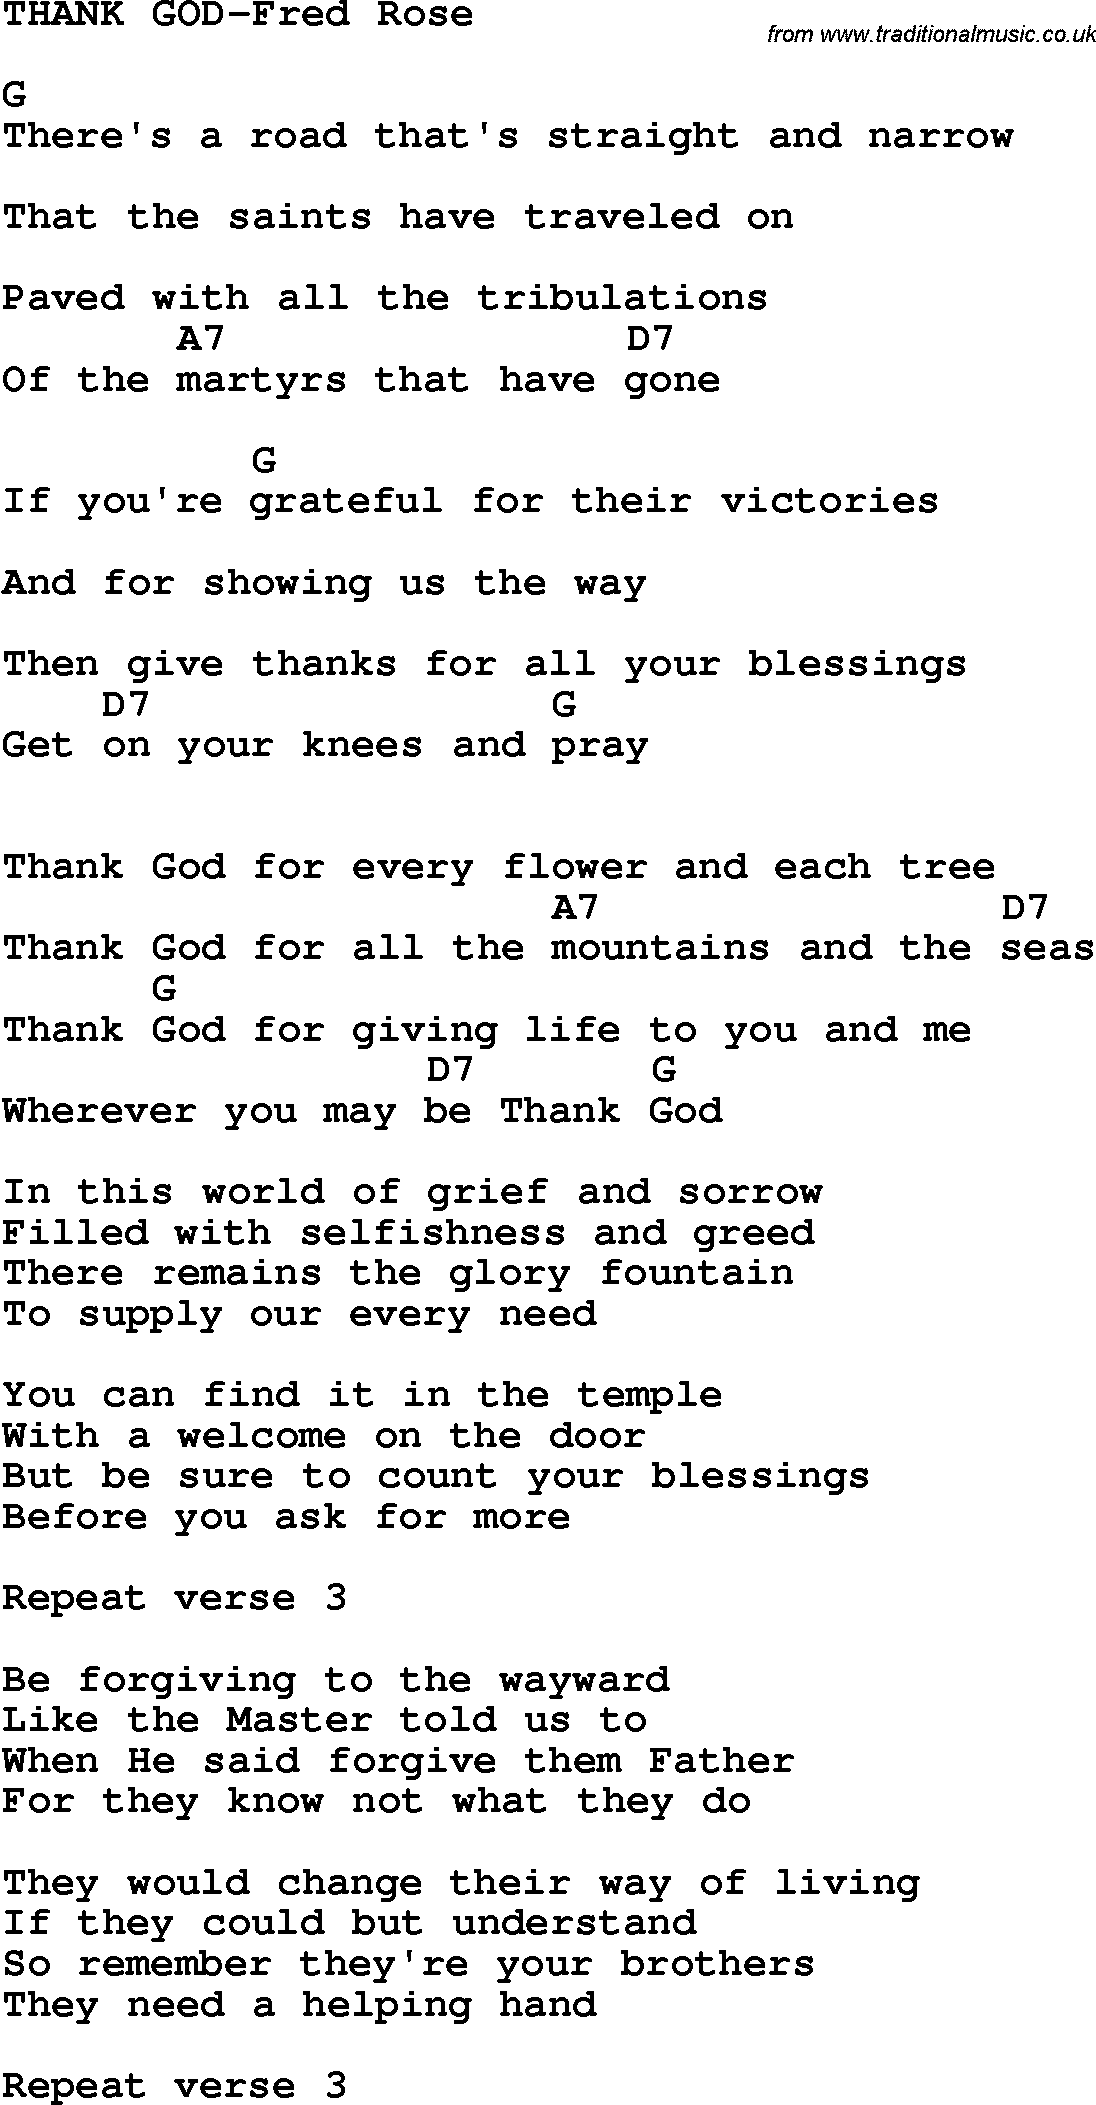 Country, Southern and Bluegrass Gospel Song THANK GOD-Fred Rose Lyrics